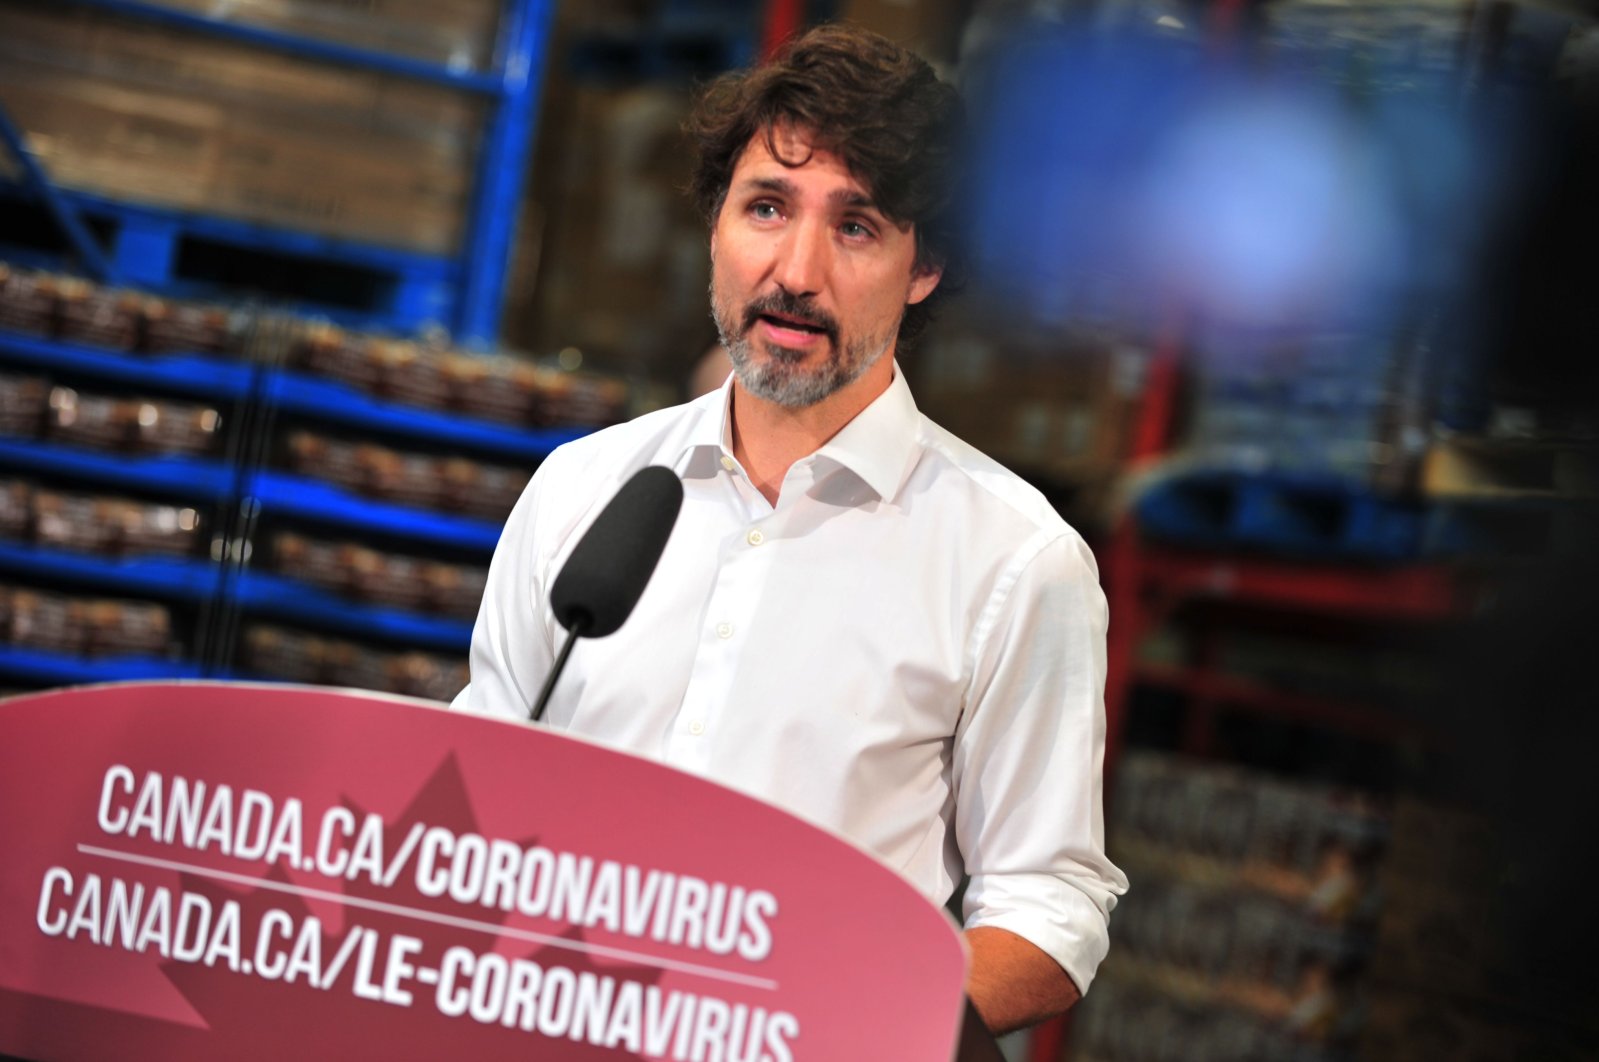 In this file photo taken on July 3, 2020 Canadian Prime Minister Justin Trudeau speaks to the press as he volunteers at the Moisson Outaouais food bank in Gatineau, Quebec, Canada during the coronavirus pandemic. (AFP Photo)